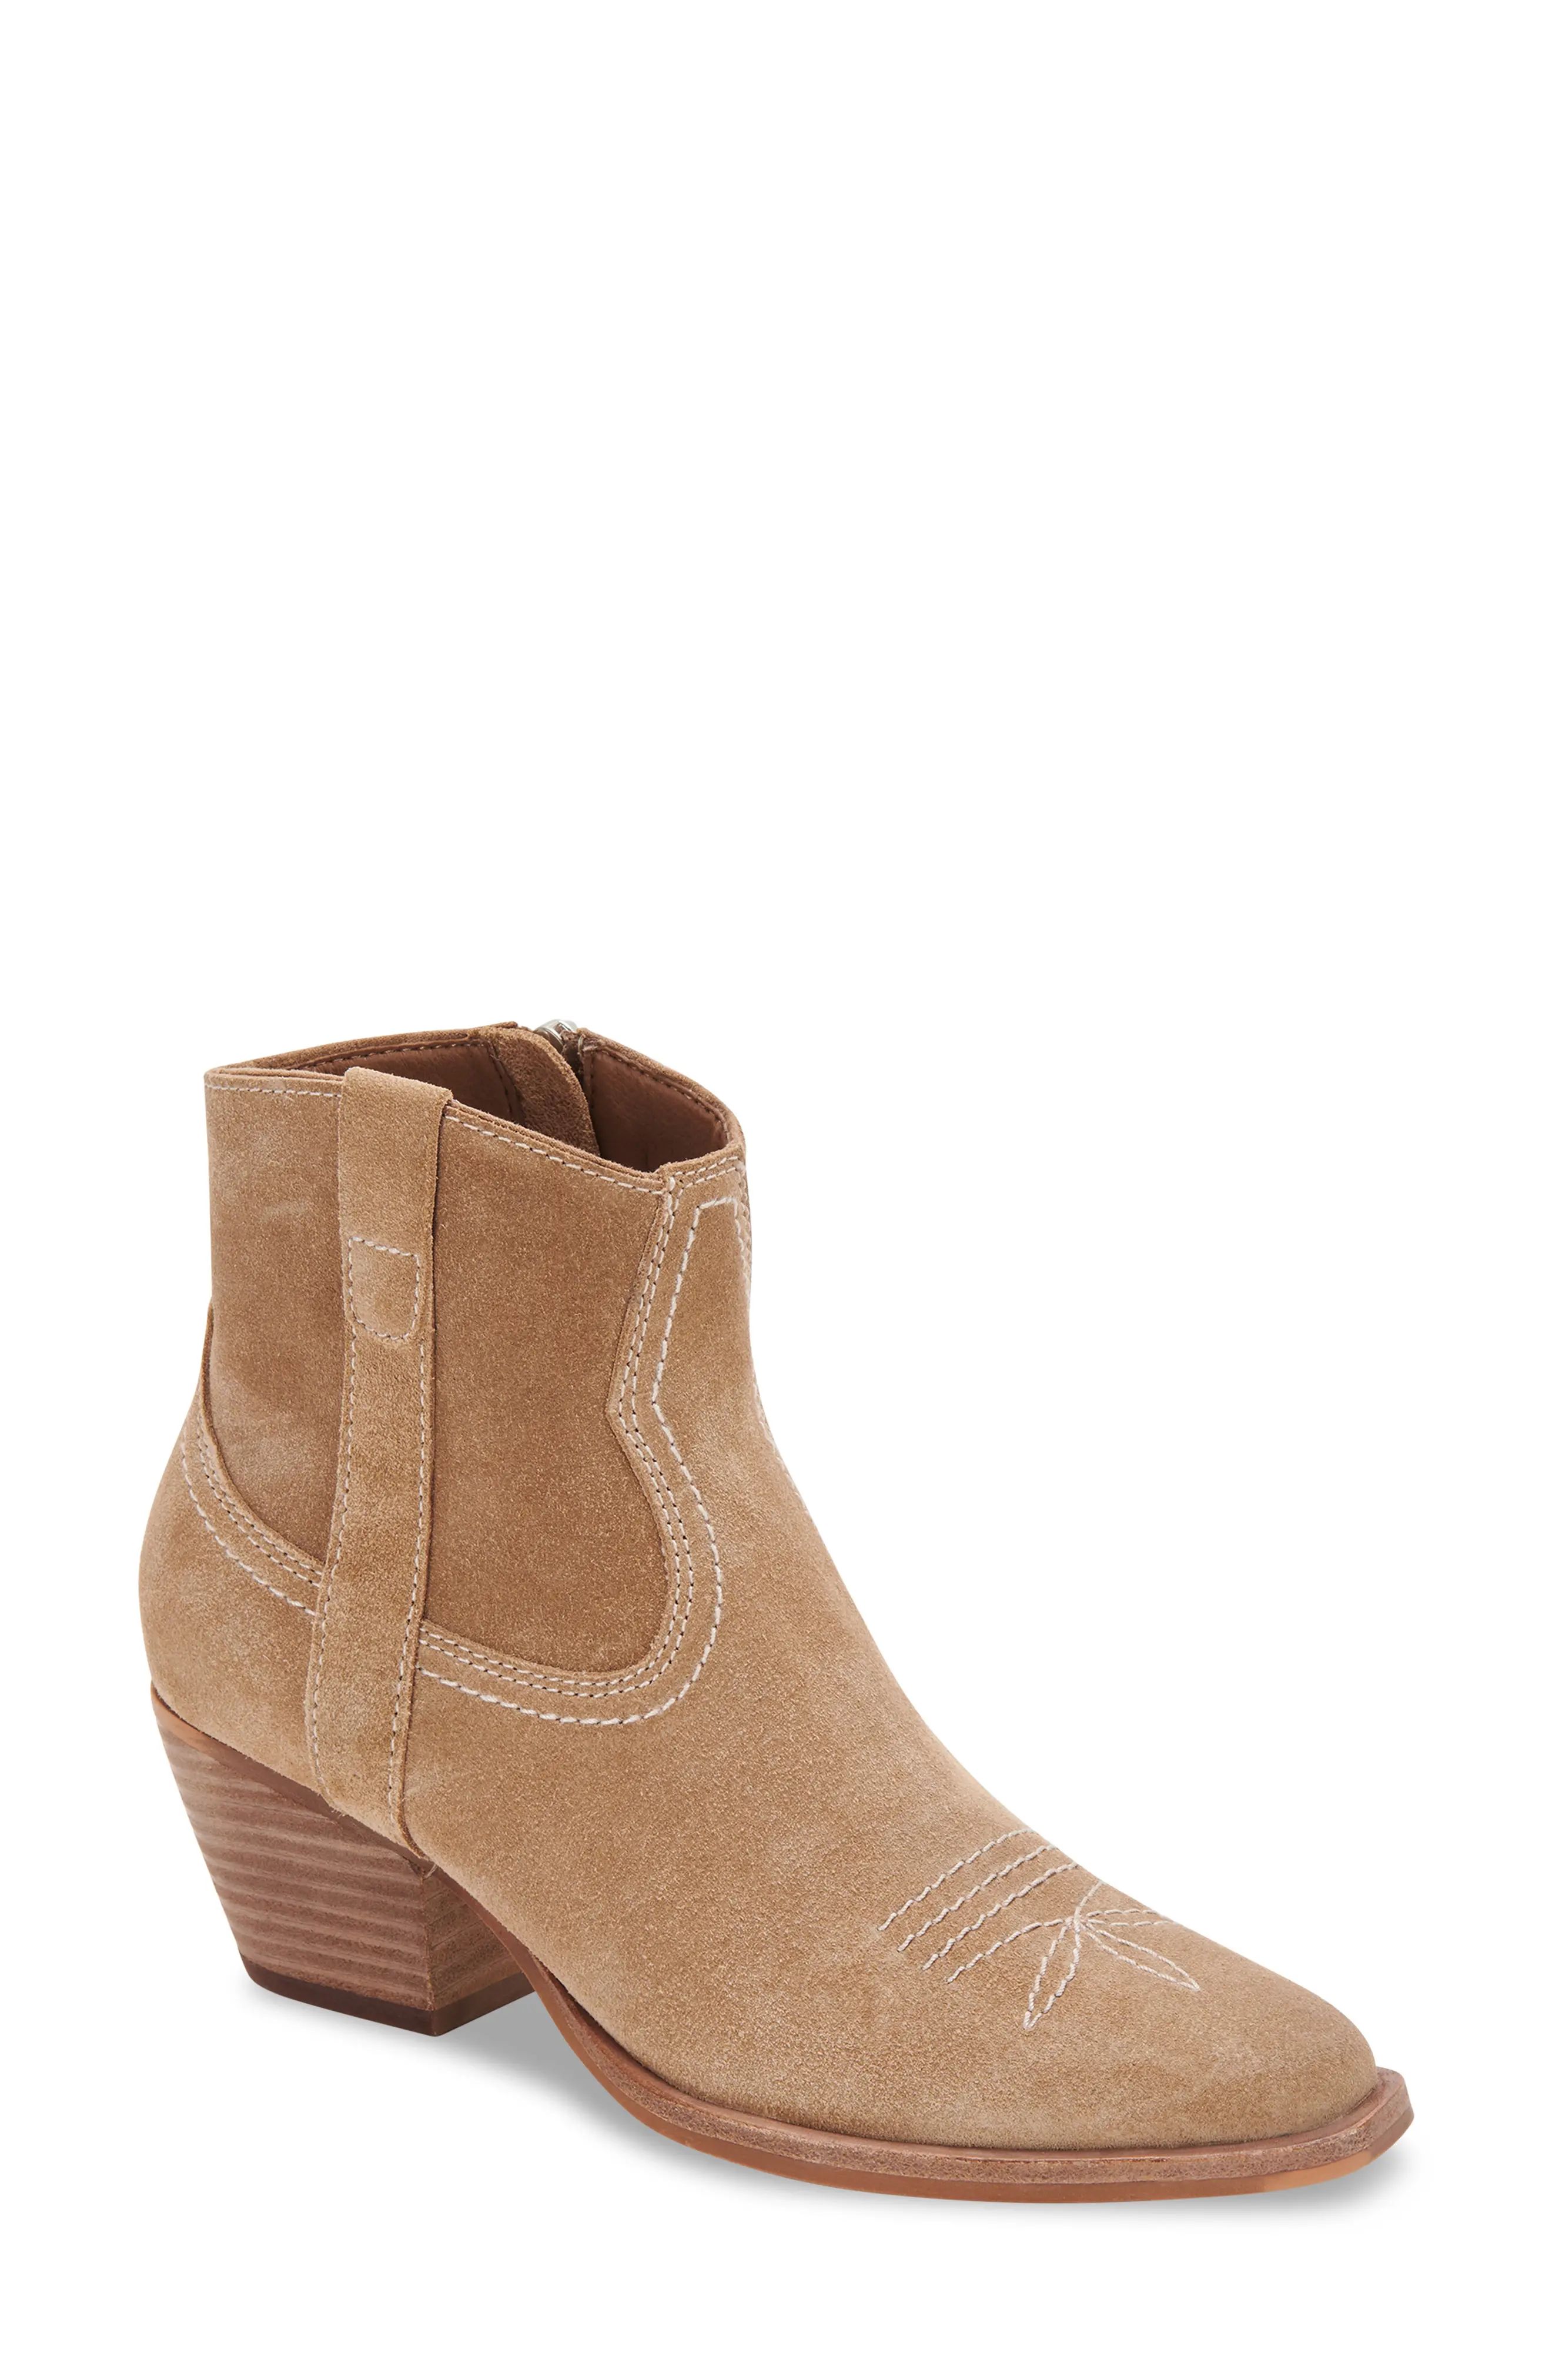 Dolce Vita Silma Bootie, Size 9.5 in Truffle Suede at Nordstrom | Nordstrom